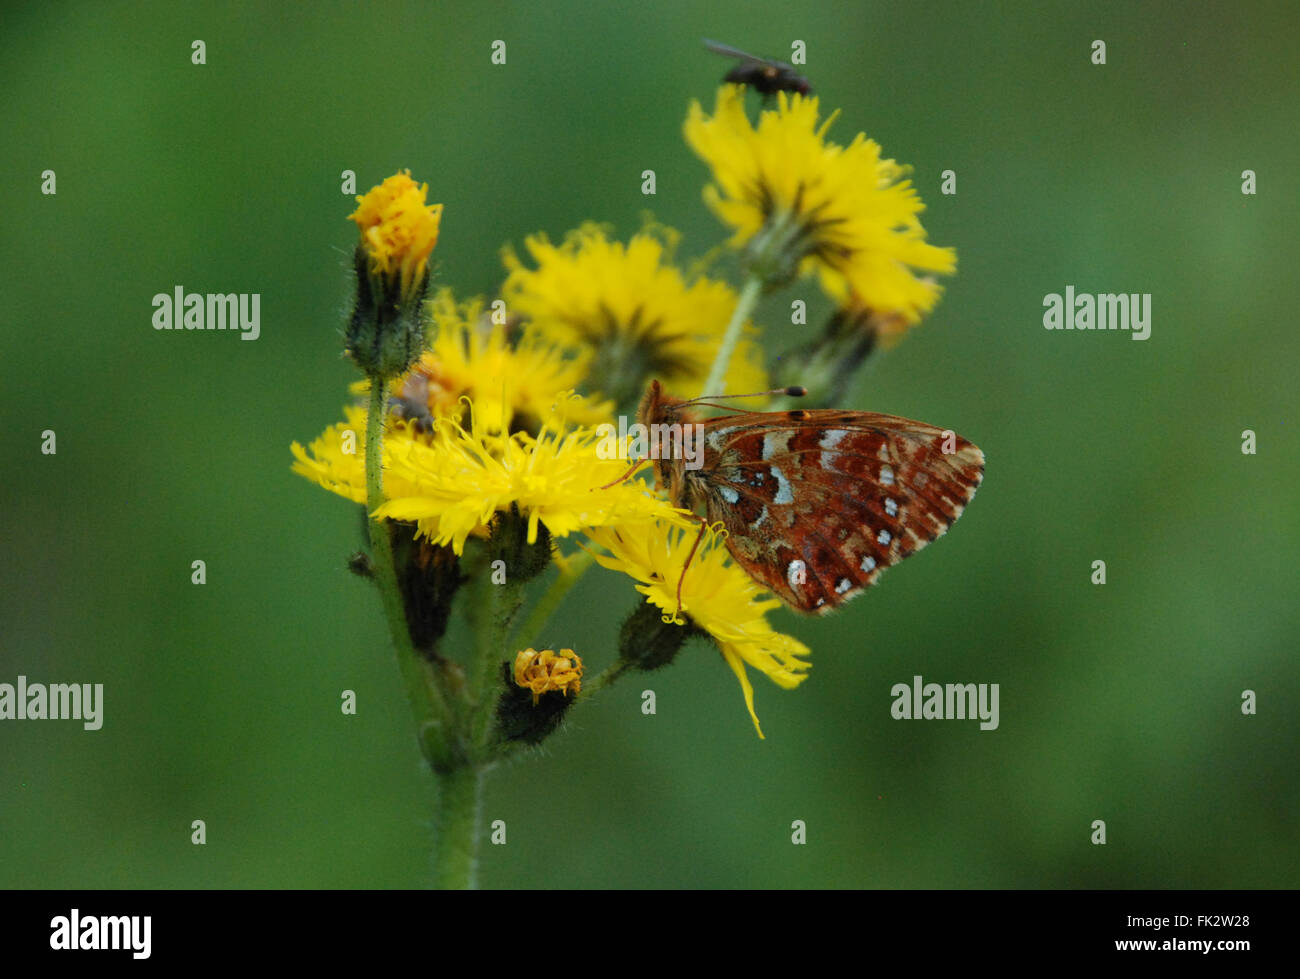 Cranberry fritillary butterfly (Boloria aquilonaris) on yellow flower in Finland Stock Photo